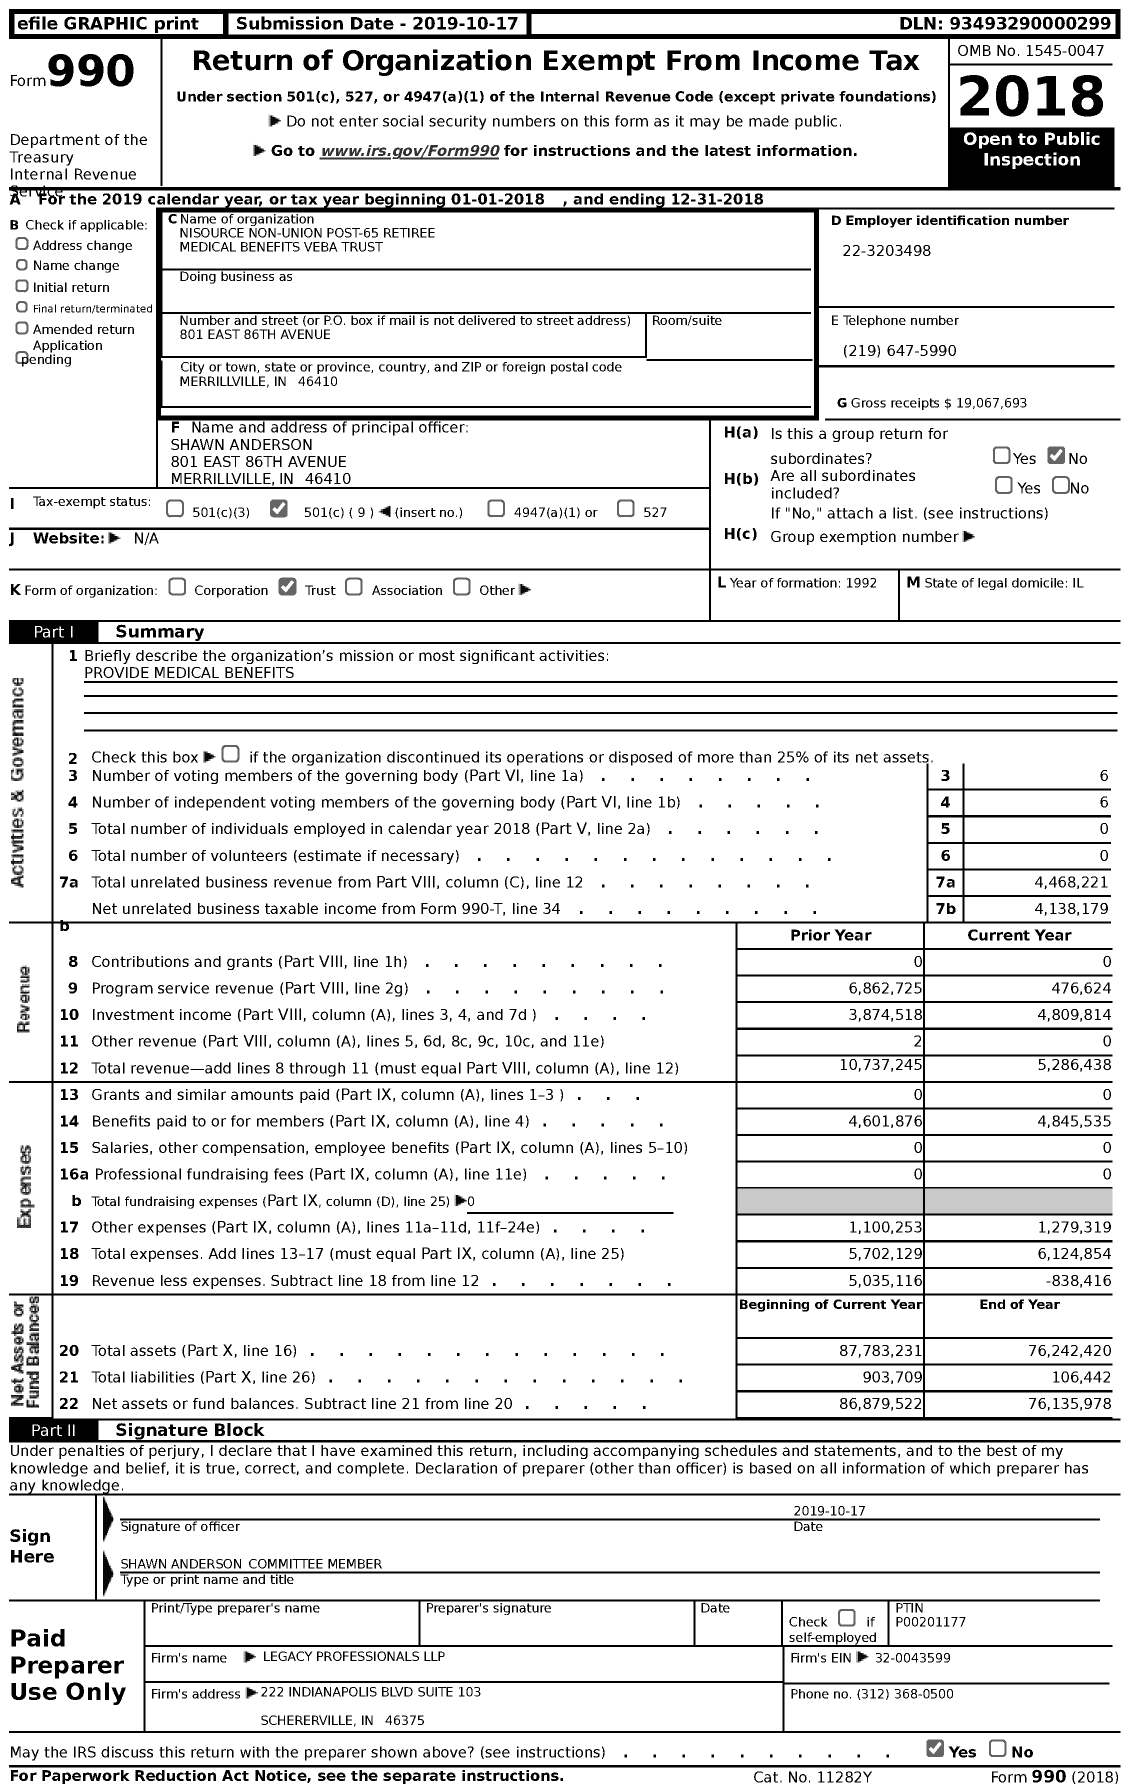 Image of first page of 2018 Form 990 for Nisource Non-Union Post-65 Retiree Medical Benefits Veba Trust